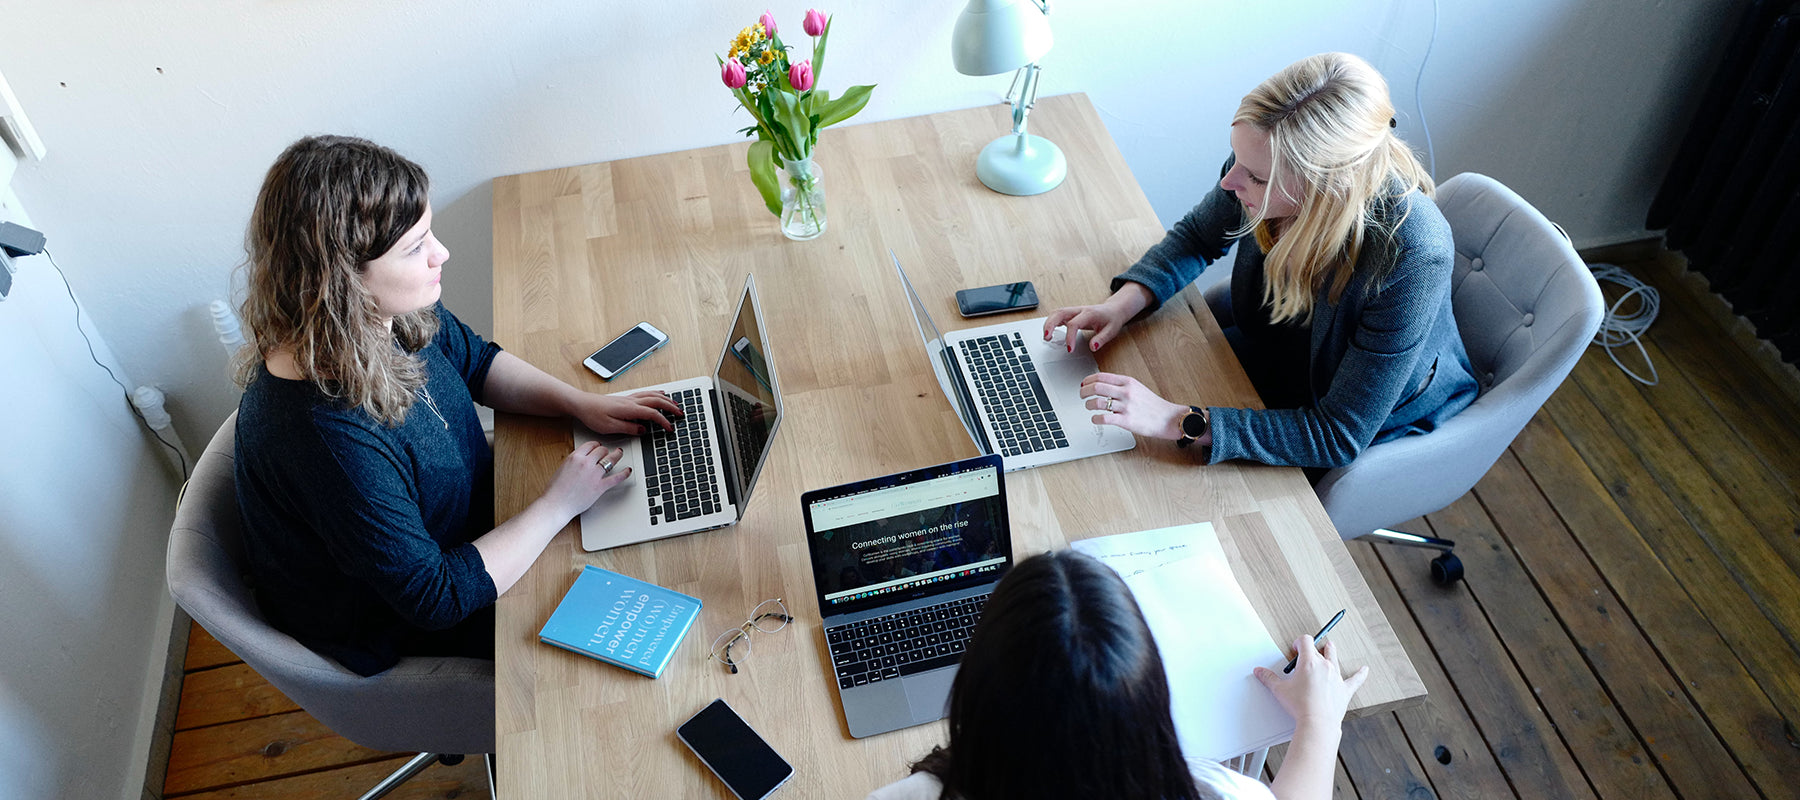 Coworker Auditing Meeting / Image courtesy of Unsplash 